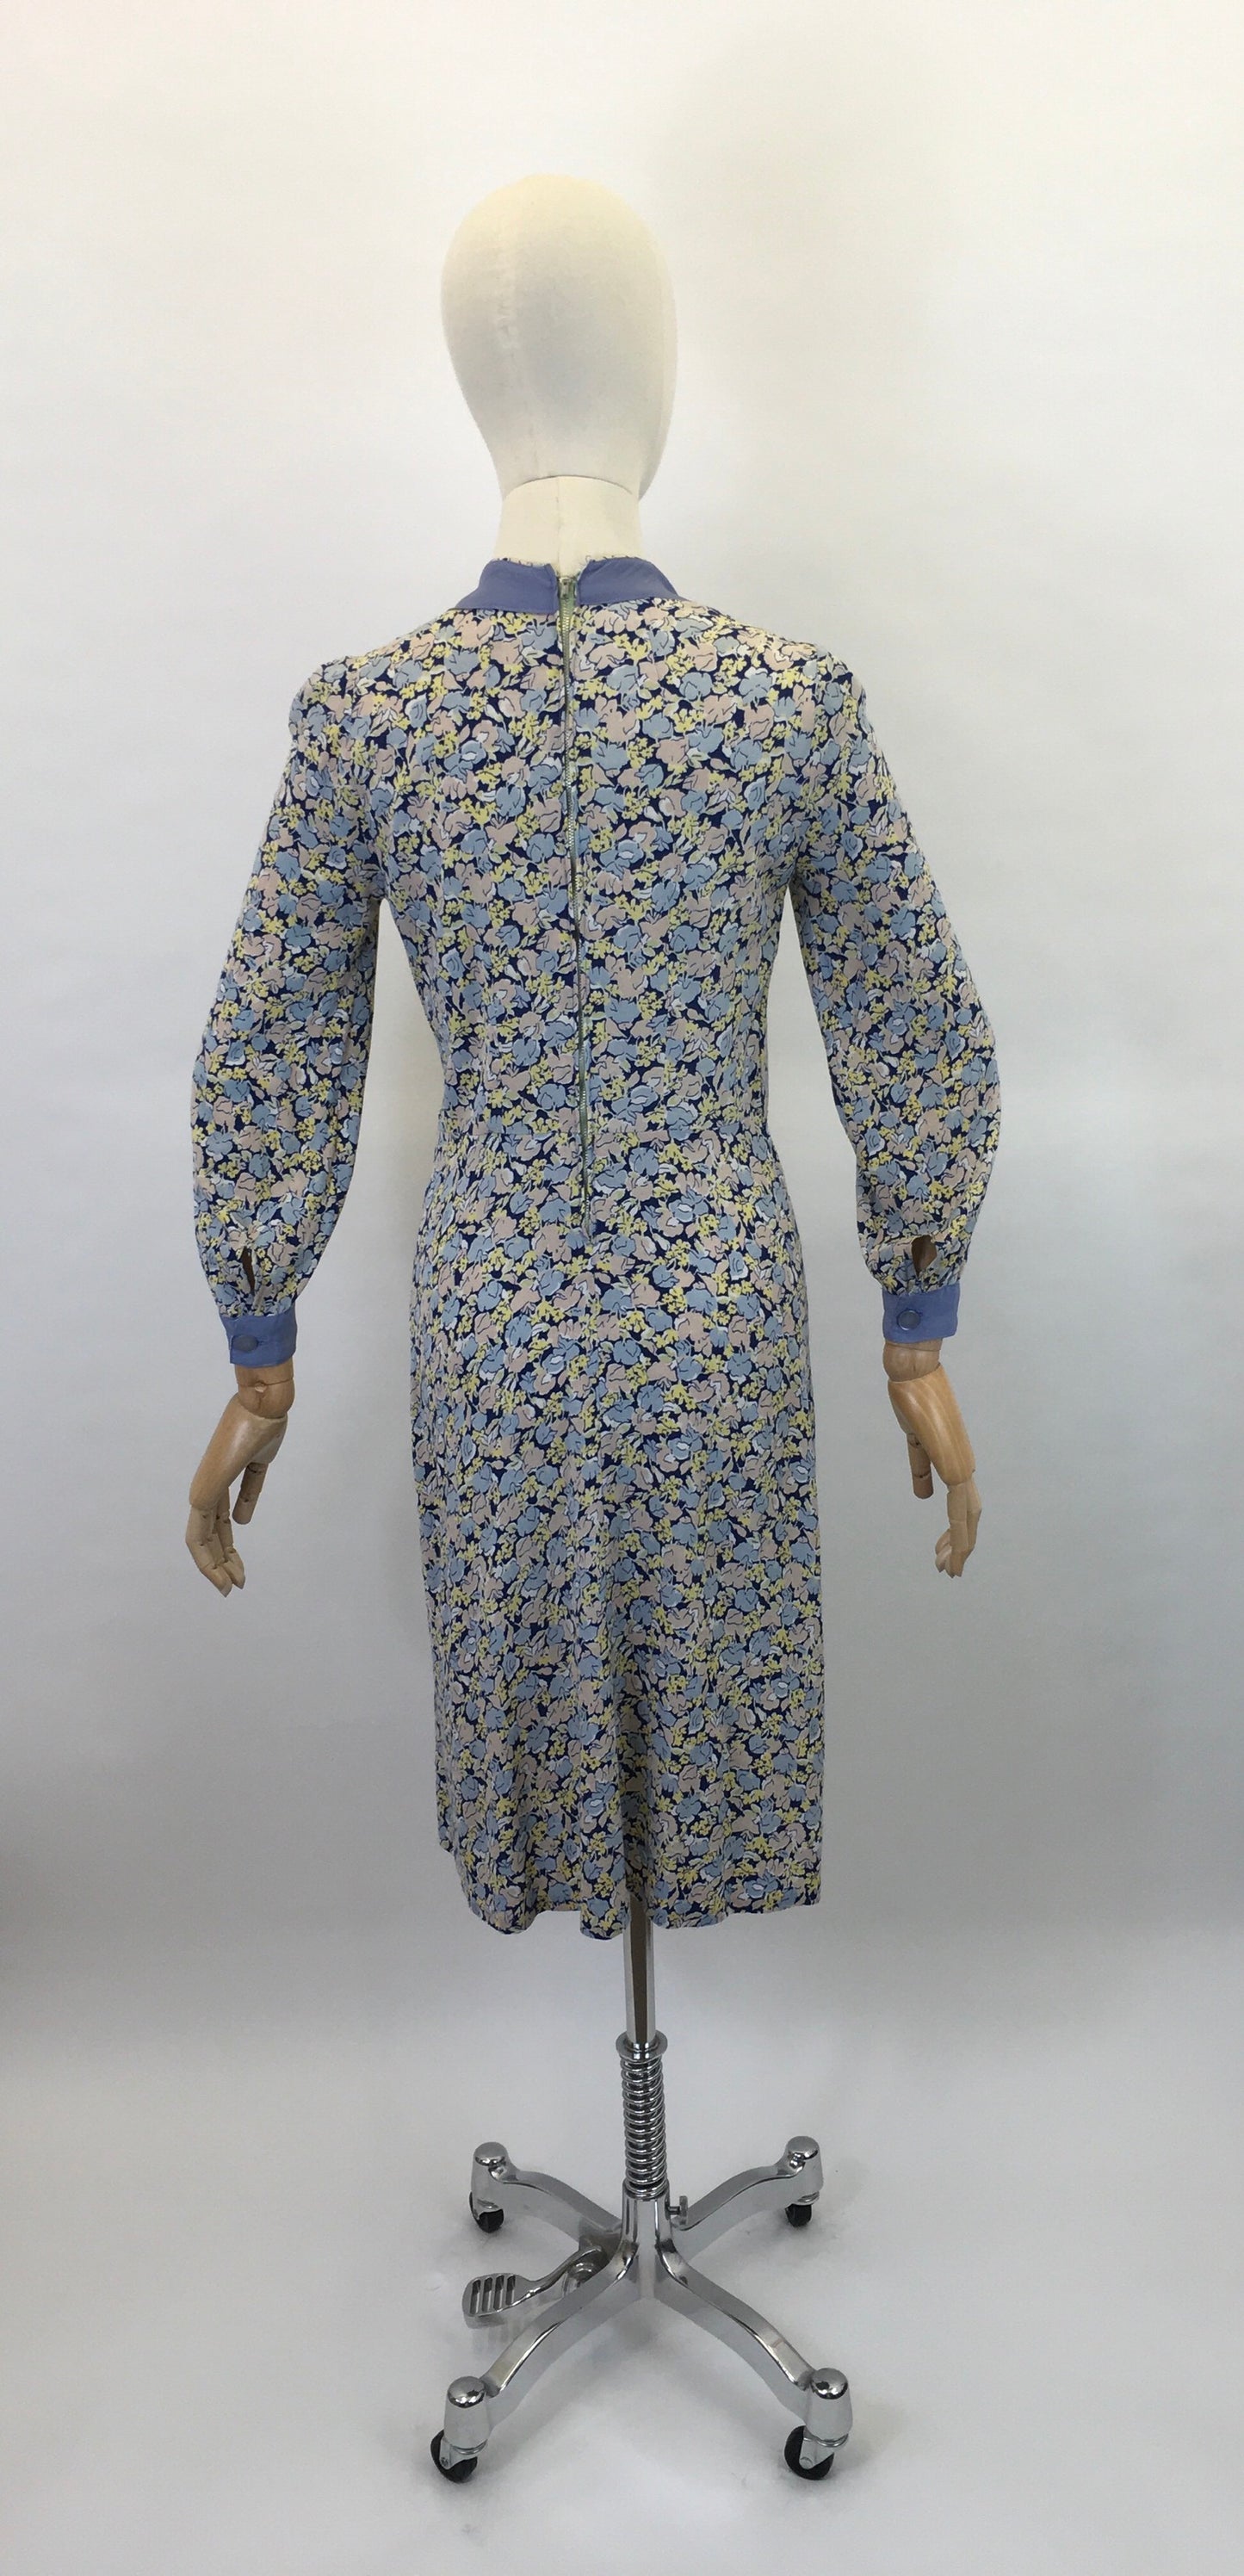 Original 1930’s Crepe Floral Day Dress - In A Pallet of Soft Pastels : Powdered Blue, Delicate Rose and Buttery Yellow